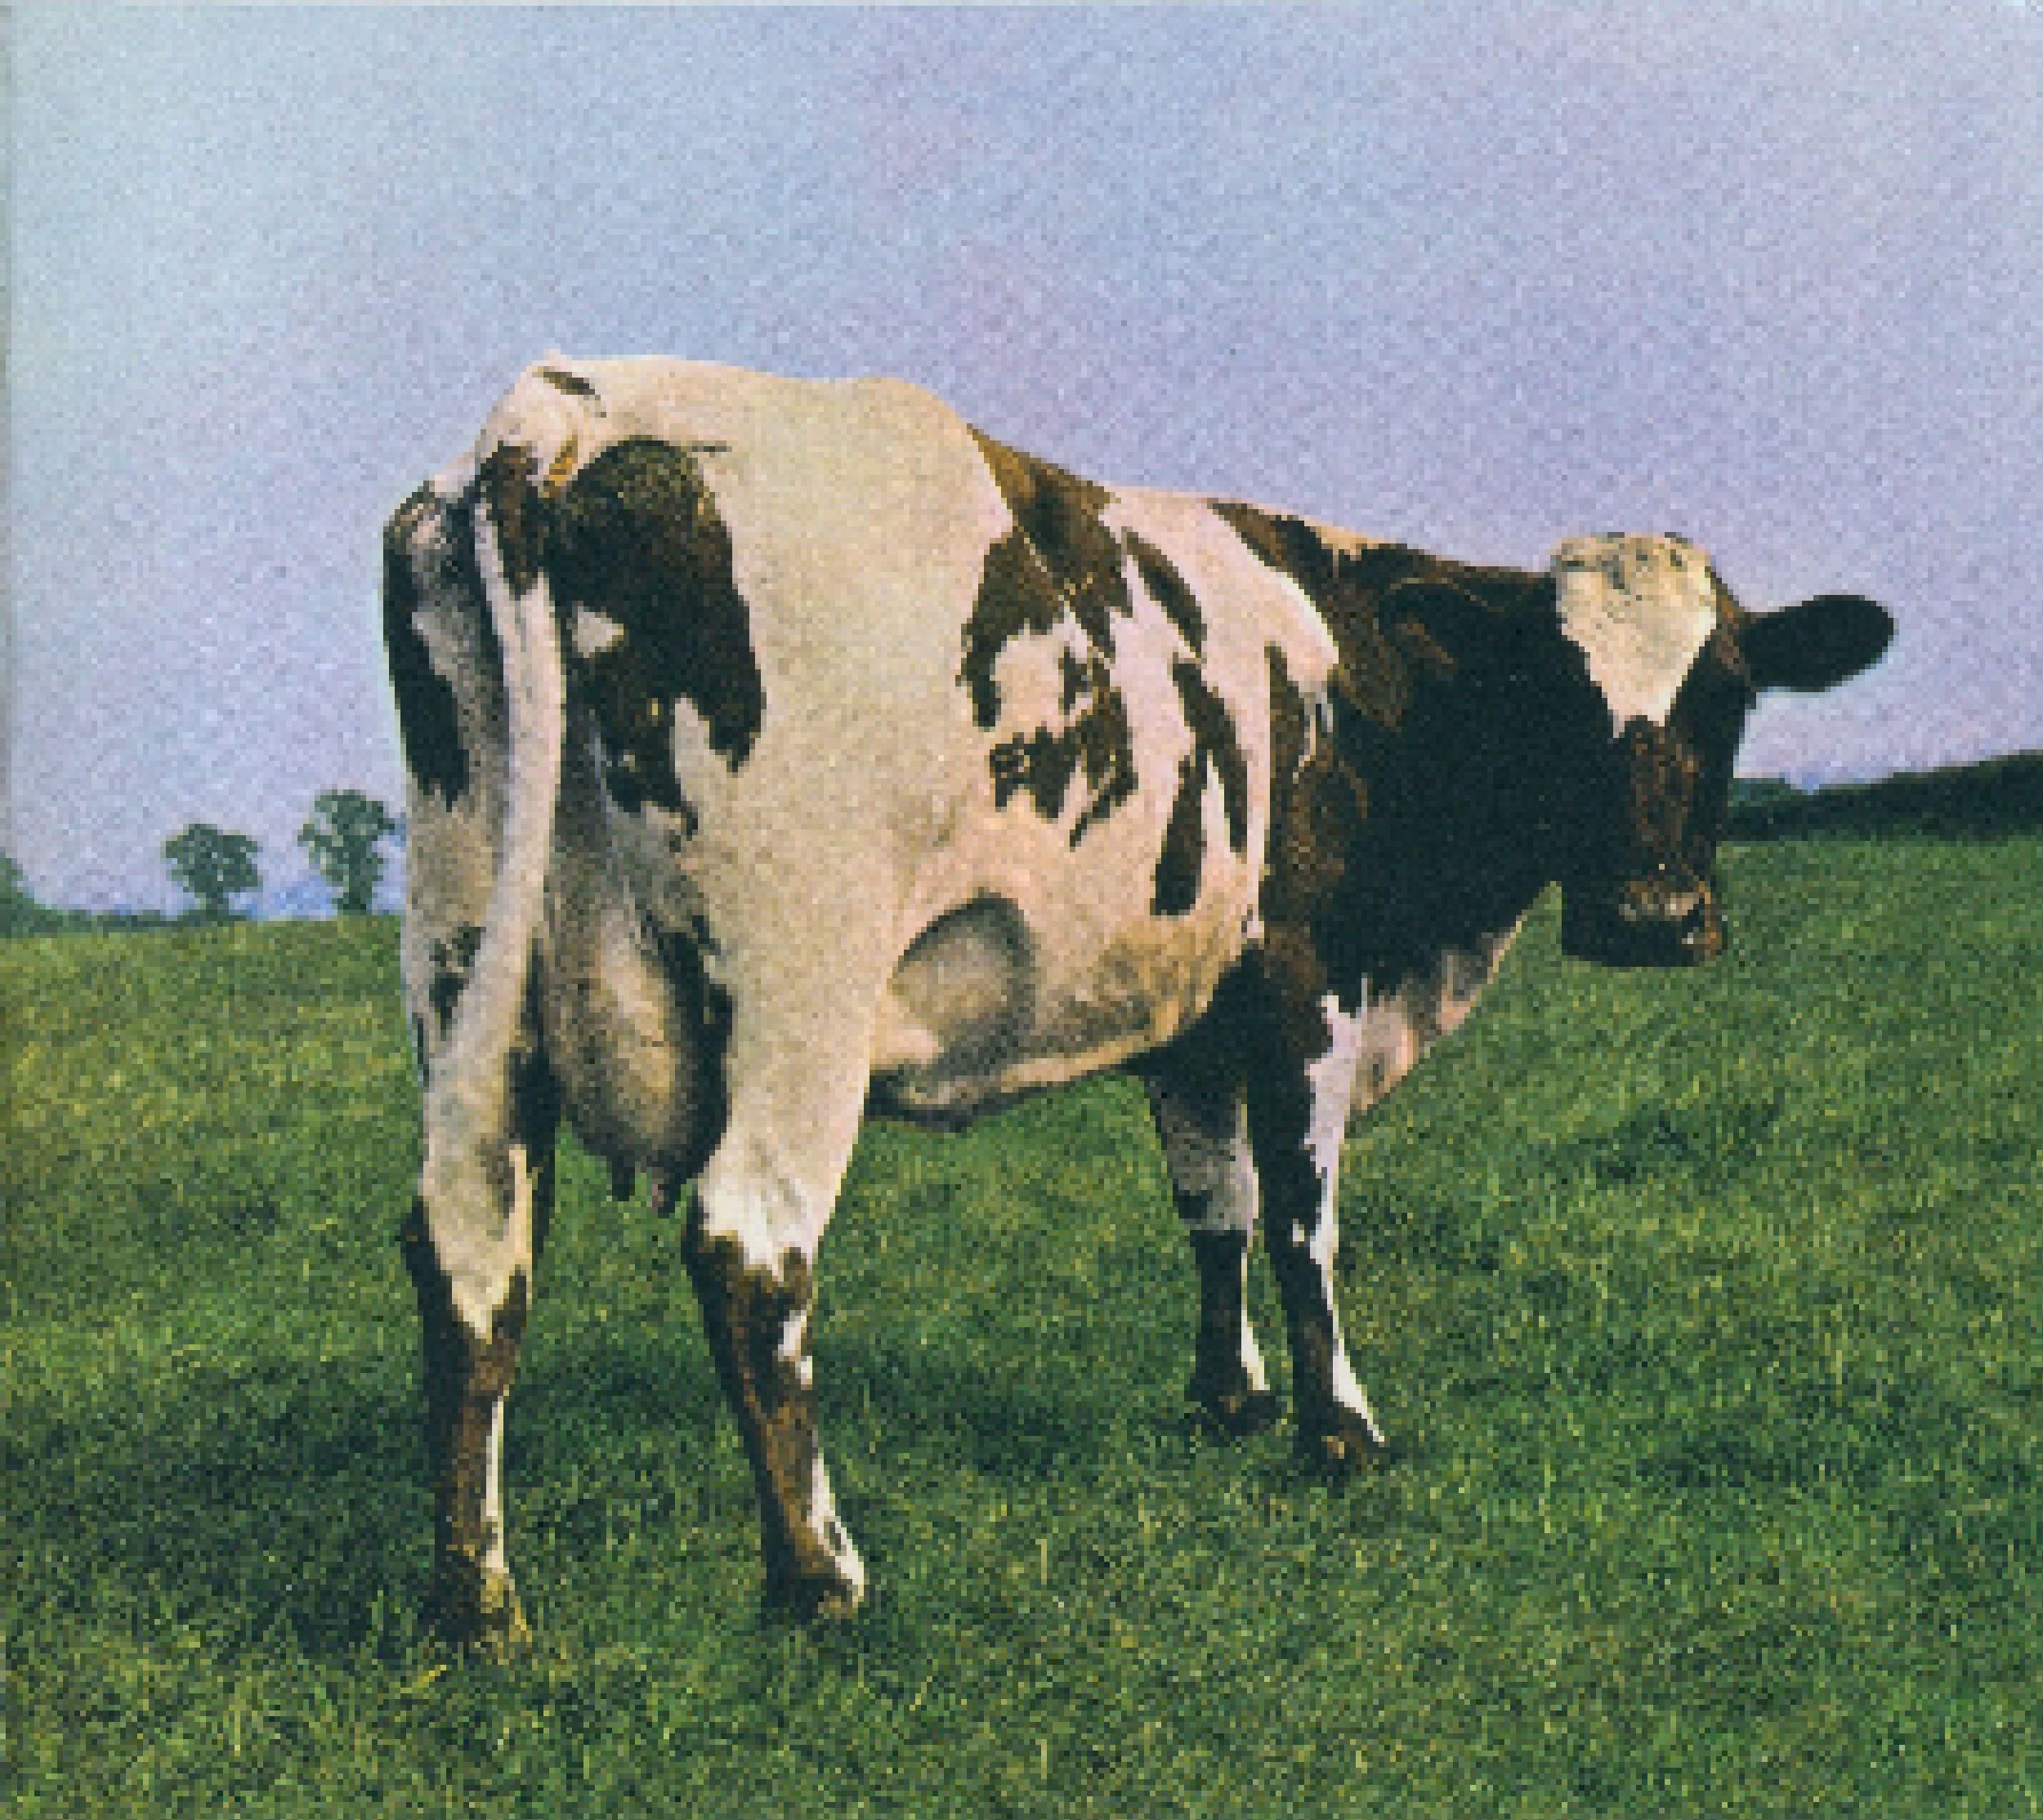 why did pink floyd hate atom heart mother?